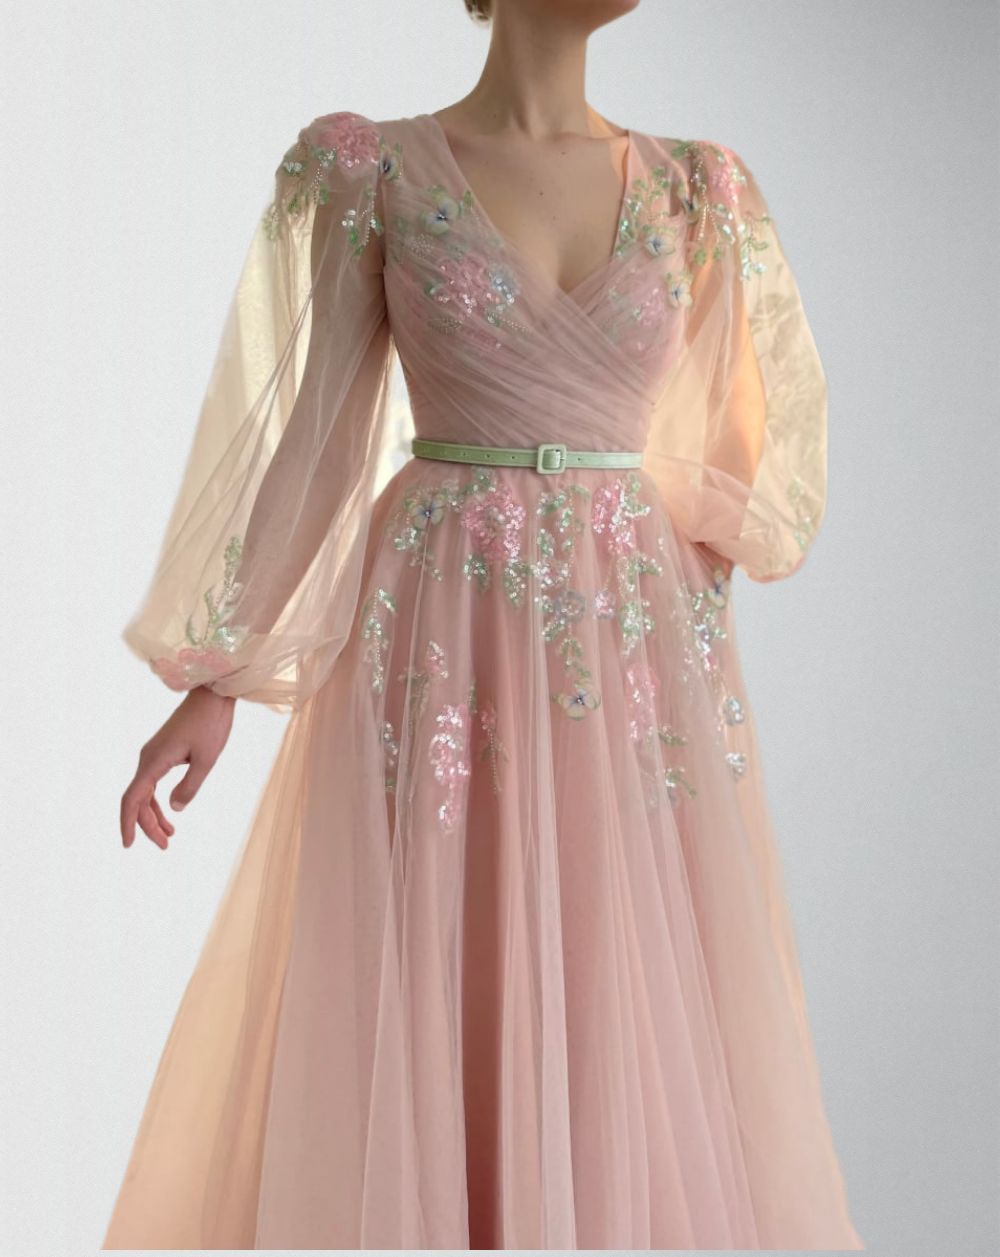 Aurora-Modest-Blush-Pink-Tulle-Puff-Long-Sleeves-Evening-Dresses-V-Neck-Colorful-Flowers-Butterfly-Sequin